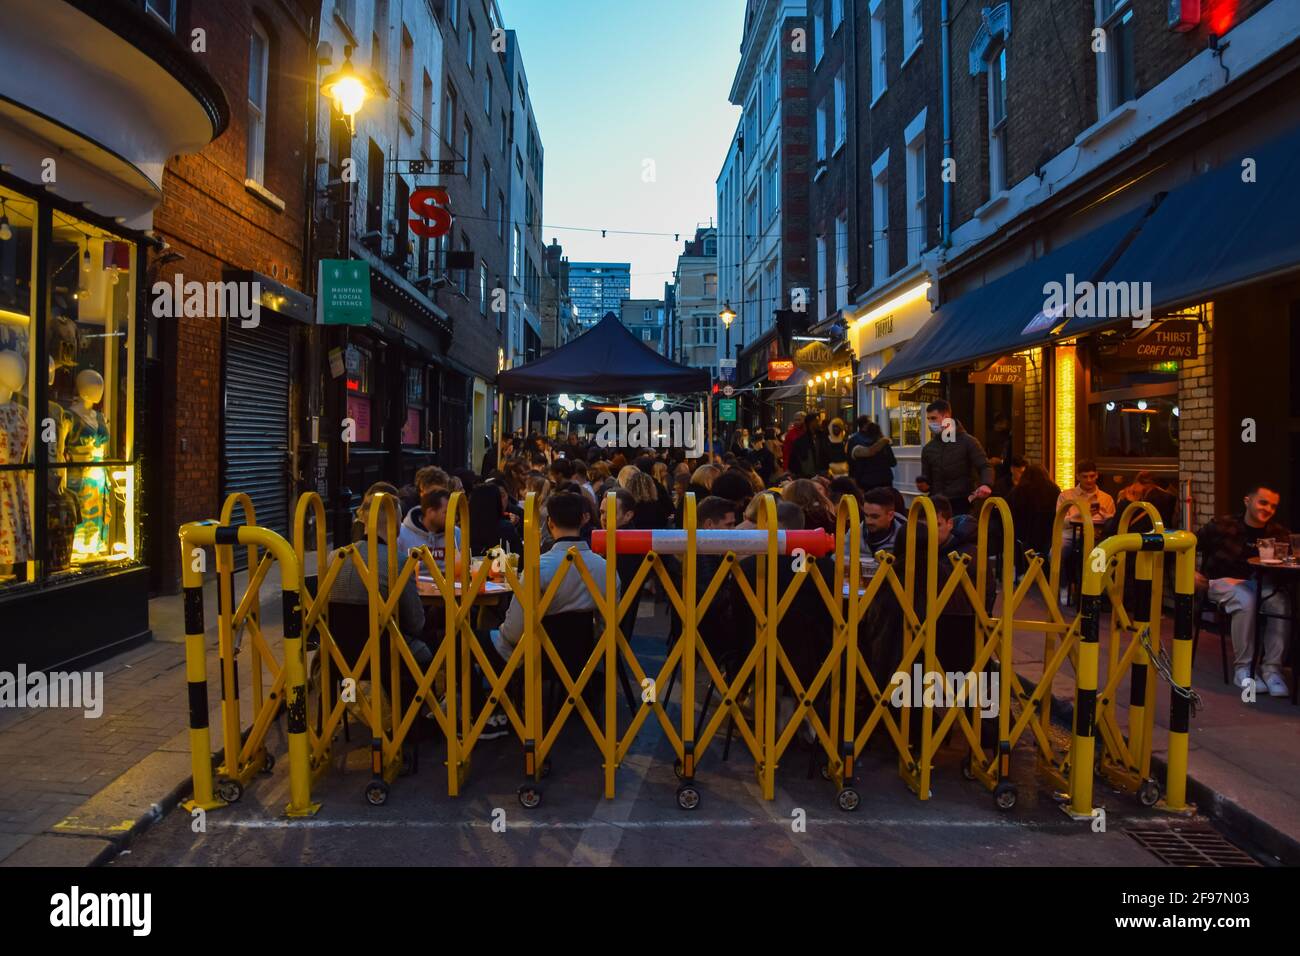 London, United Kingdom. 16th April 2021. A busy bar in Soho. Crowds of people packed the bars and restaurants in Central London on the first Friday since lockdown rules were relaxed. Stock Photo